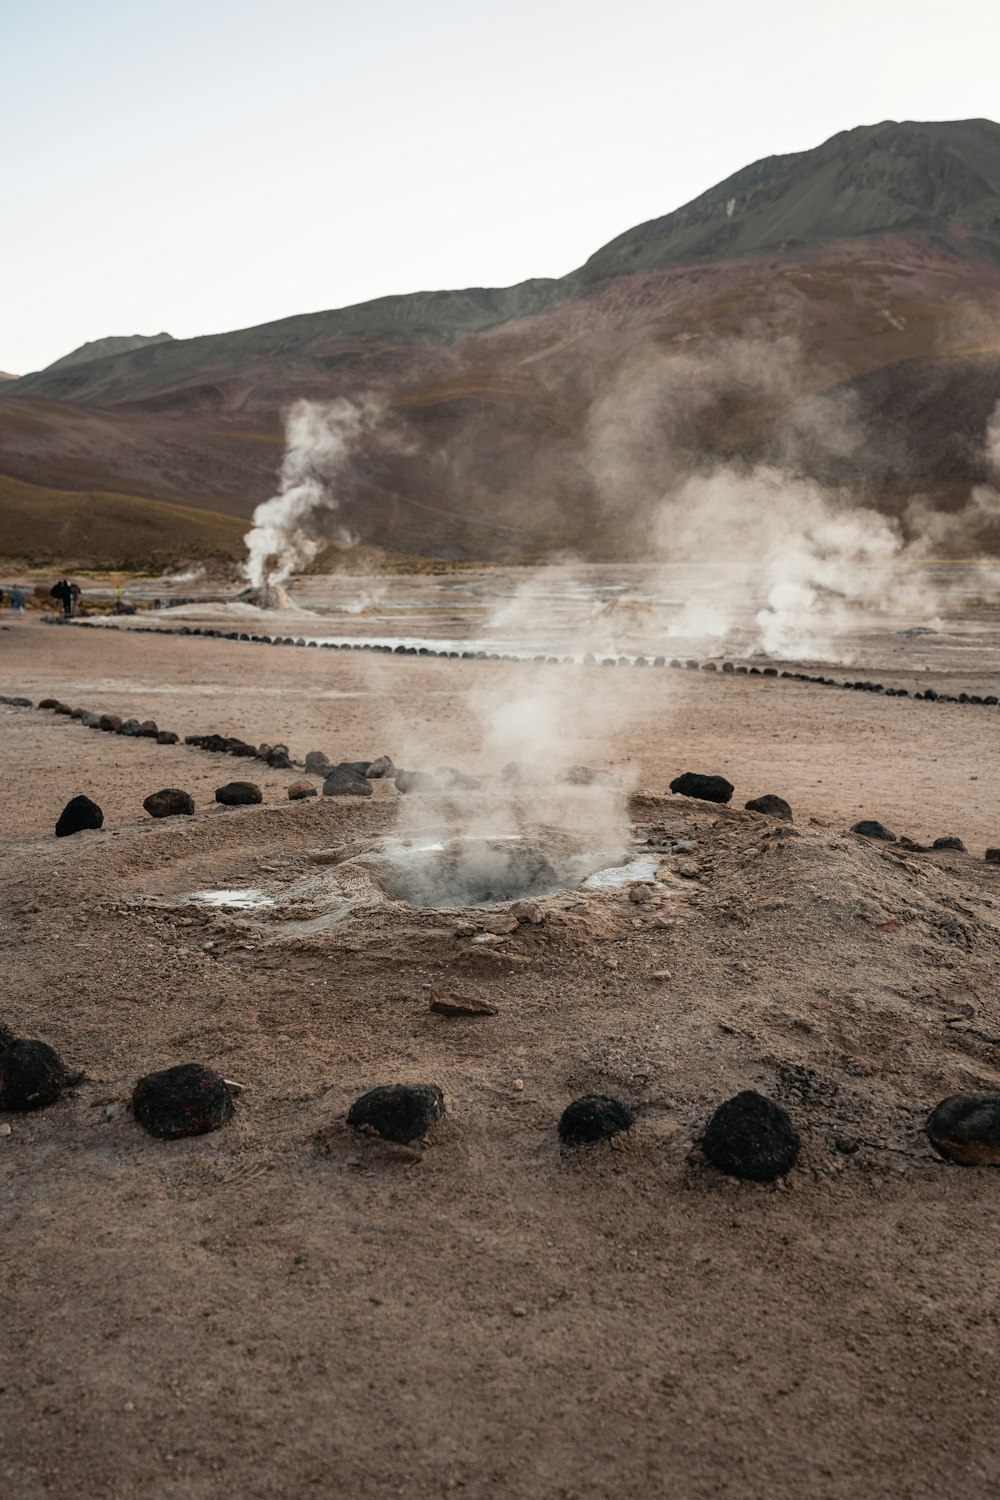 steam rises from a pool of water in the desert